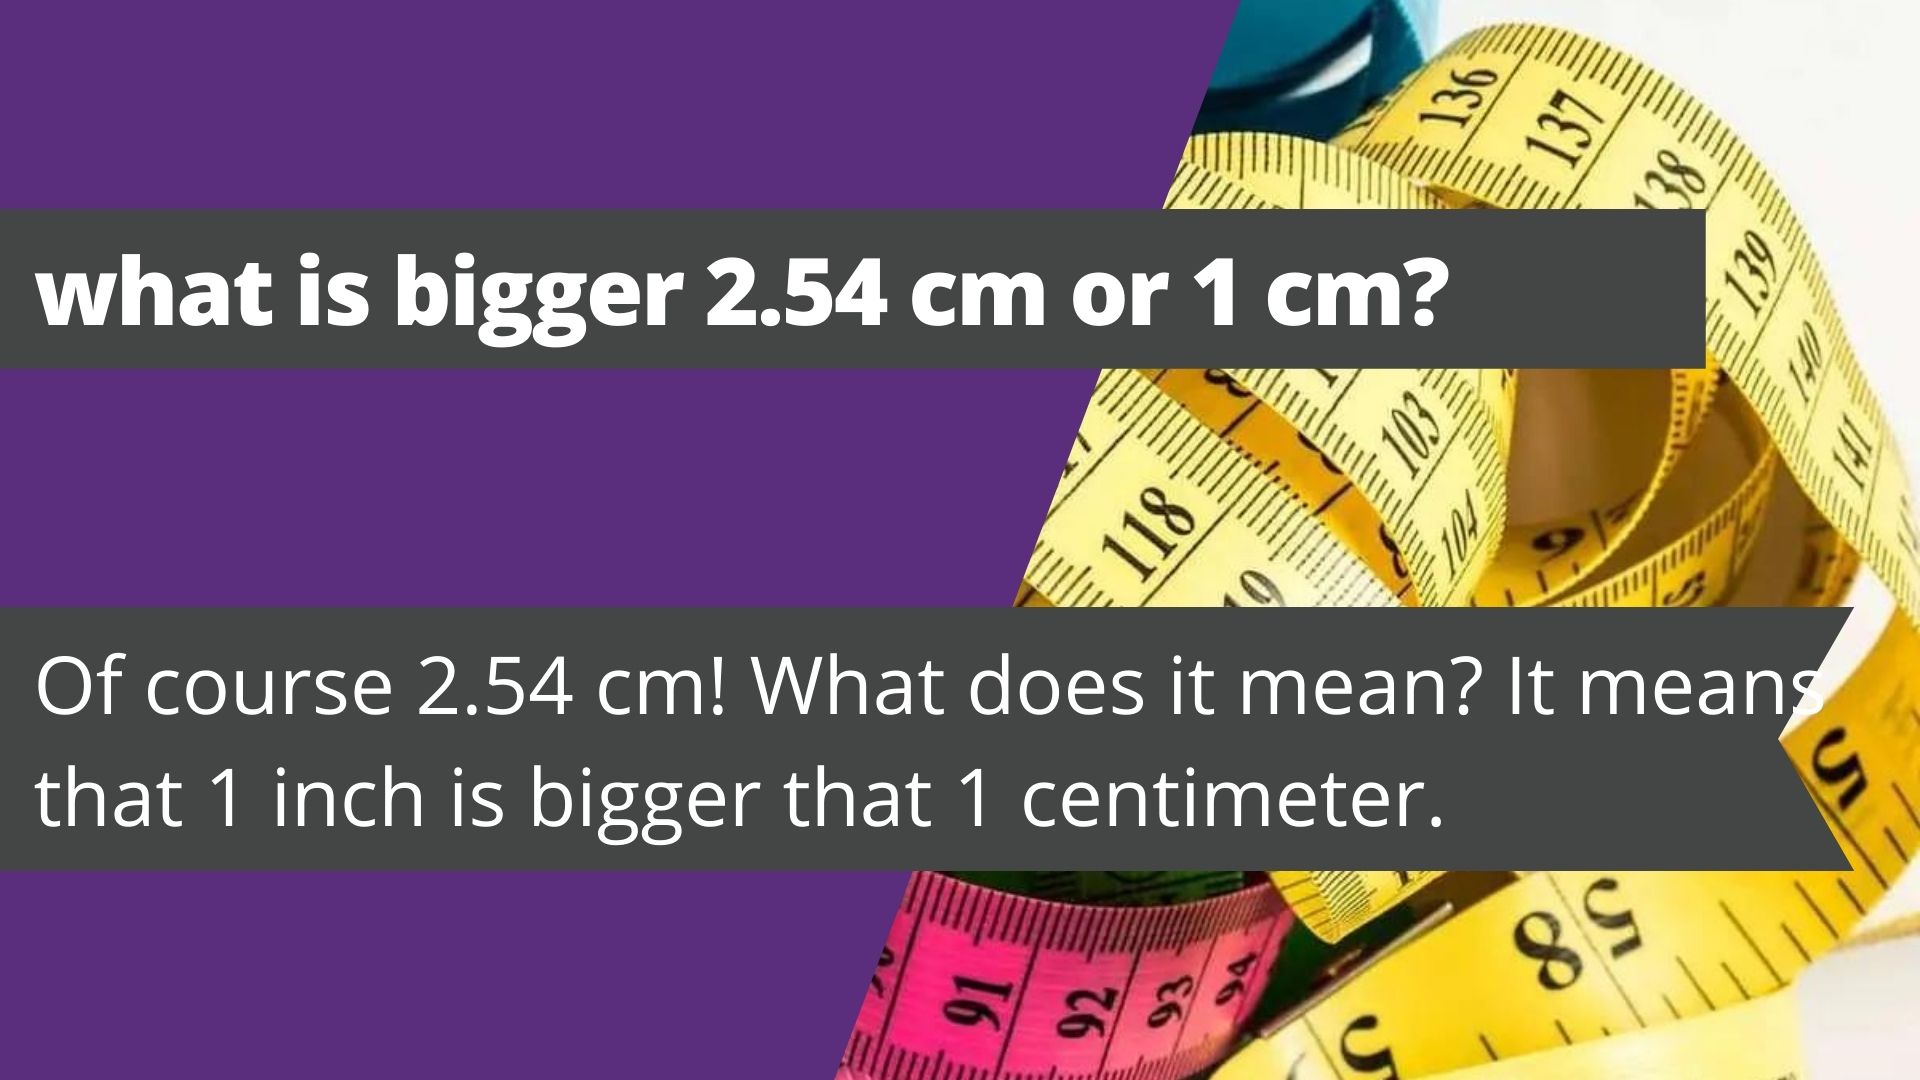 what is bigger 2.54 cm or 1 cm? 